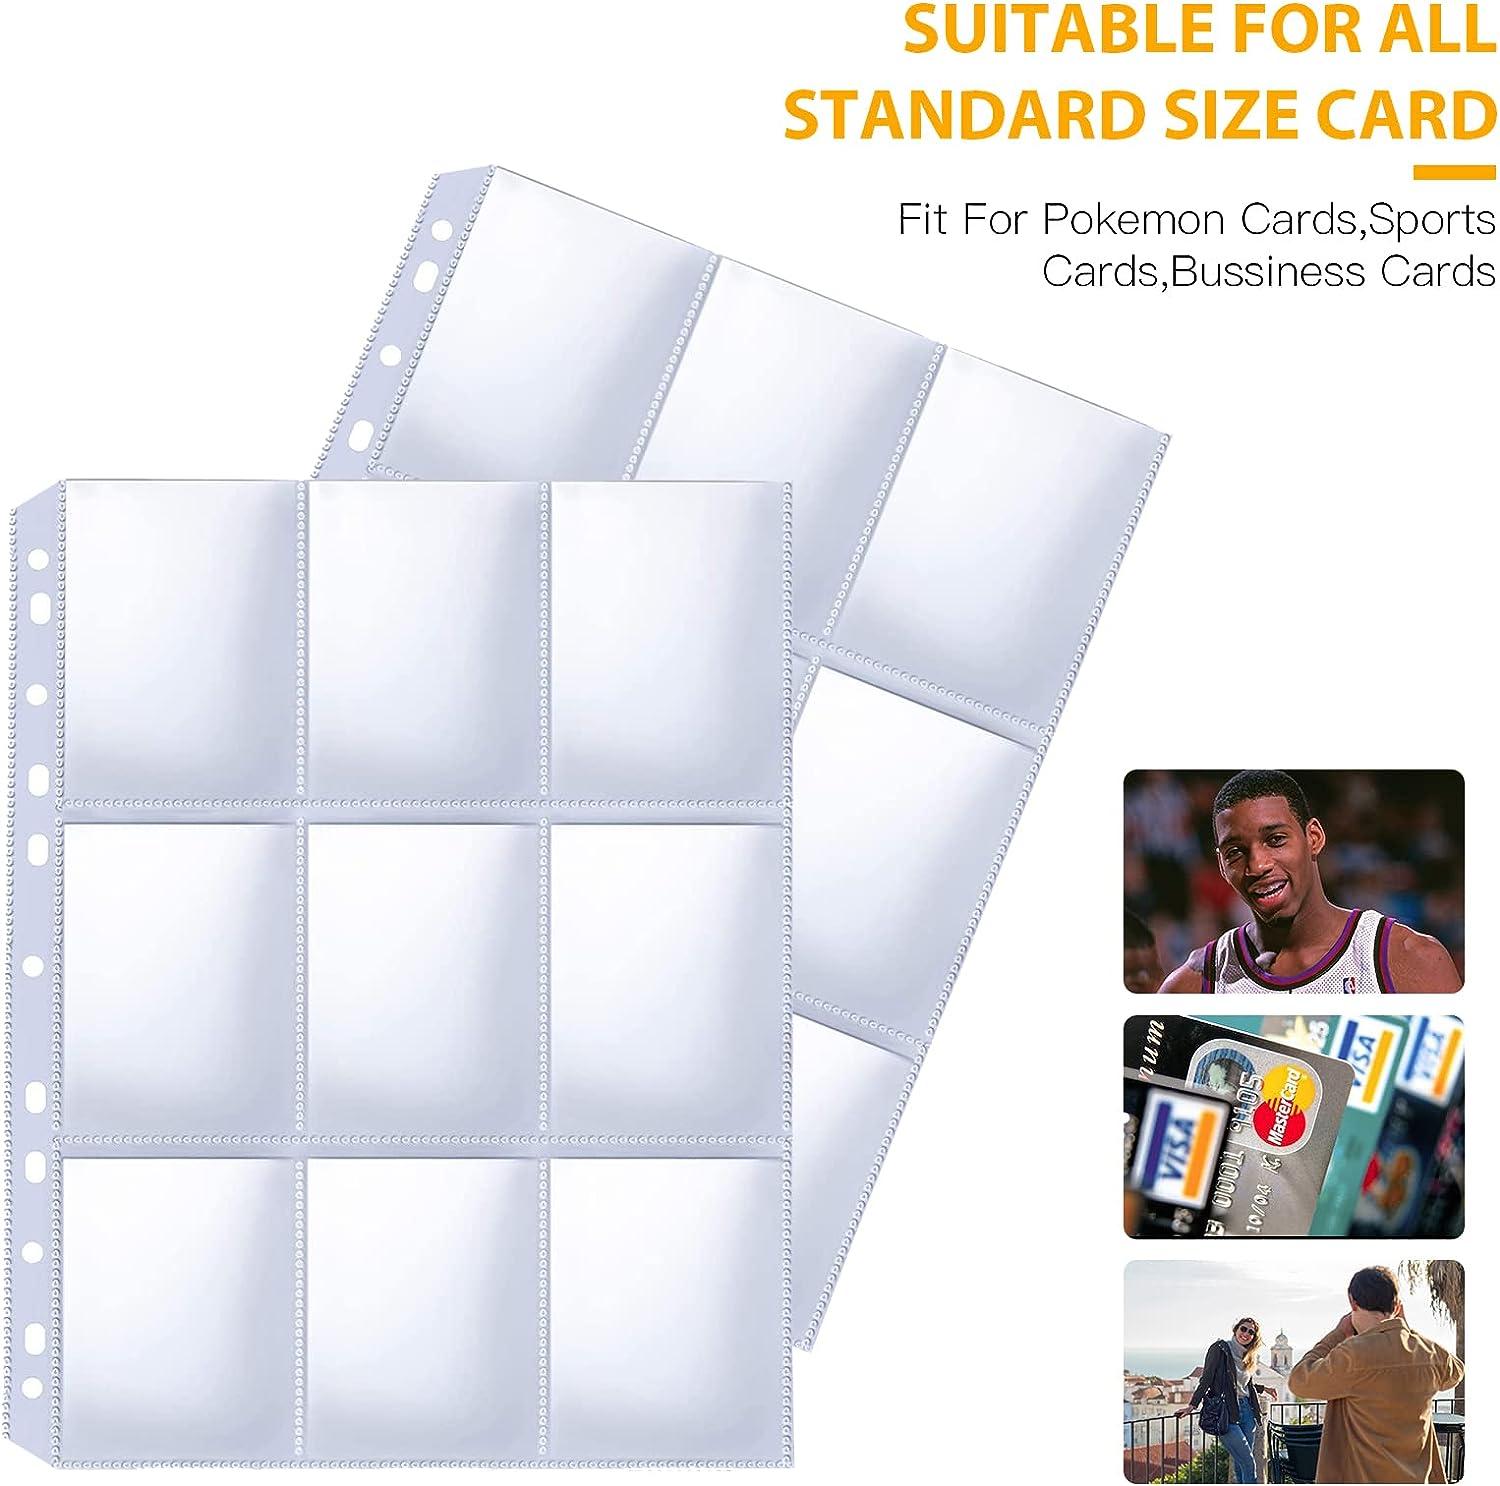 9 Pocket Card Sleeves for 3 Ring Binder, Double Sided Card Sleeves